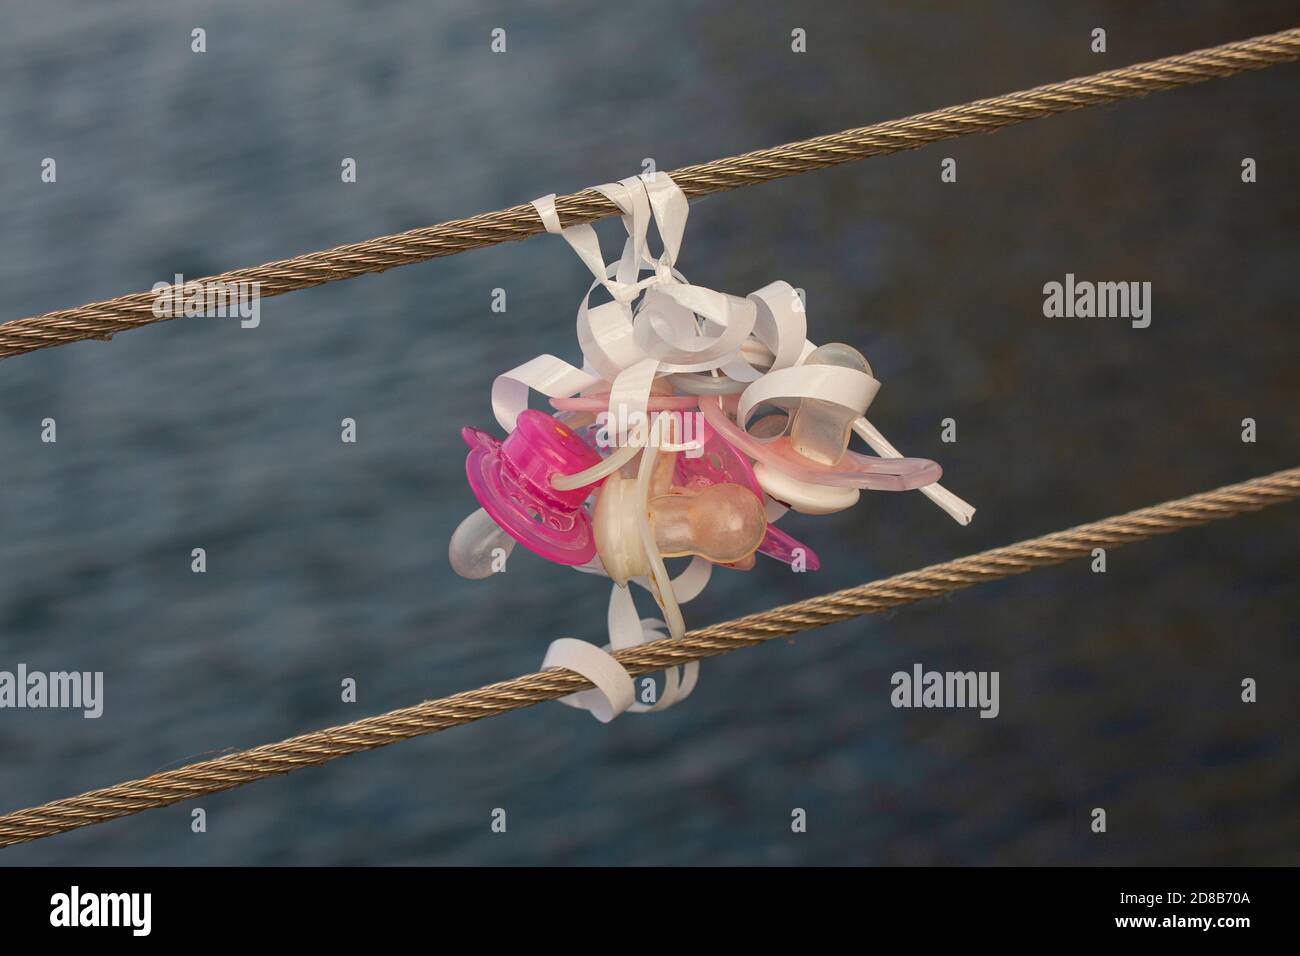 Bunch of baby pacifiers fixed to a railing wire on a bridge. Hanging the dummies helps the toddler to get rid of them is a tradition in Scandinavia. C Stock Photo